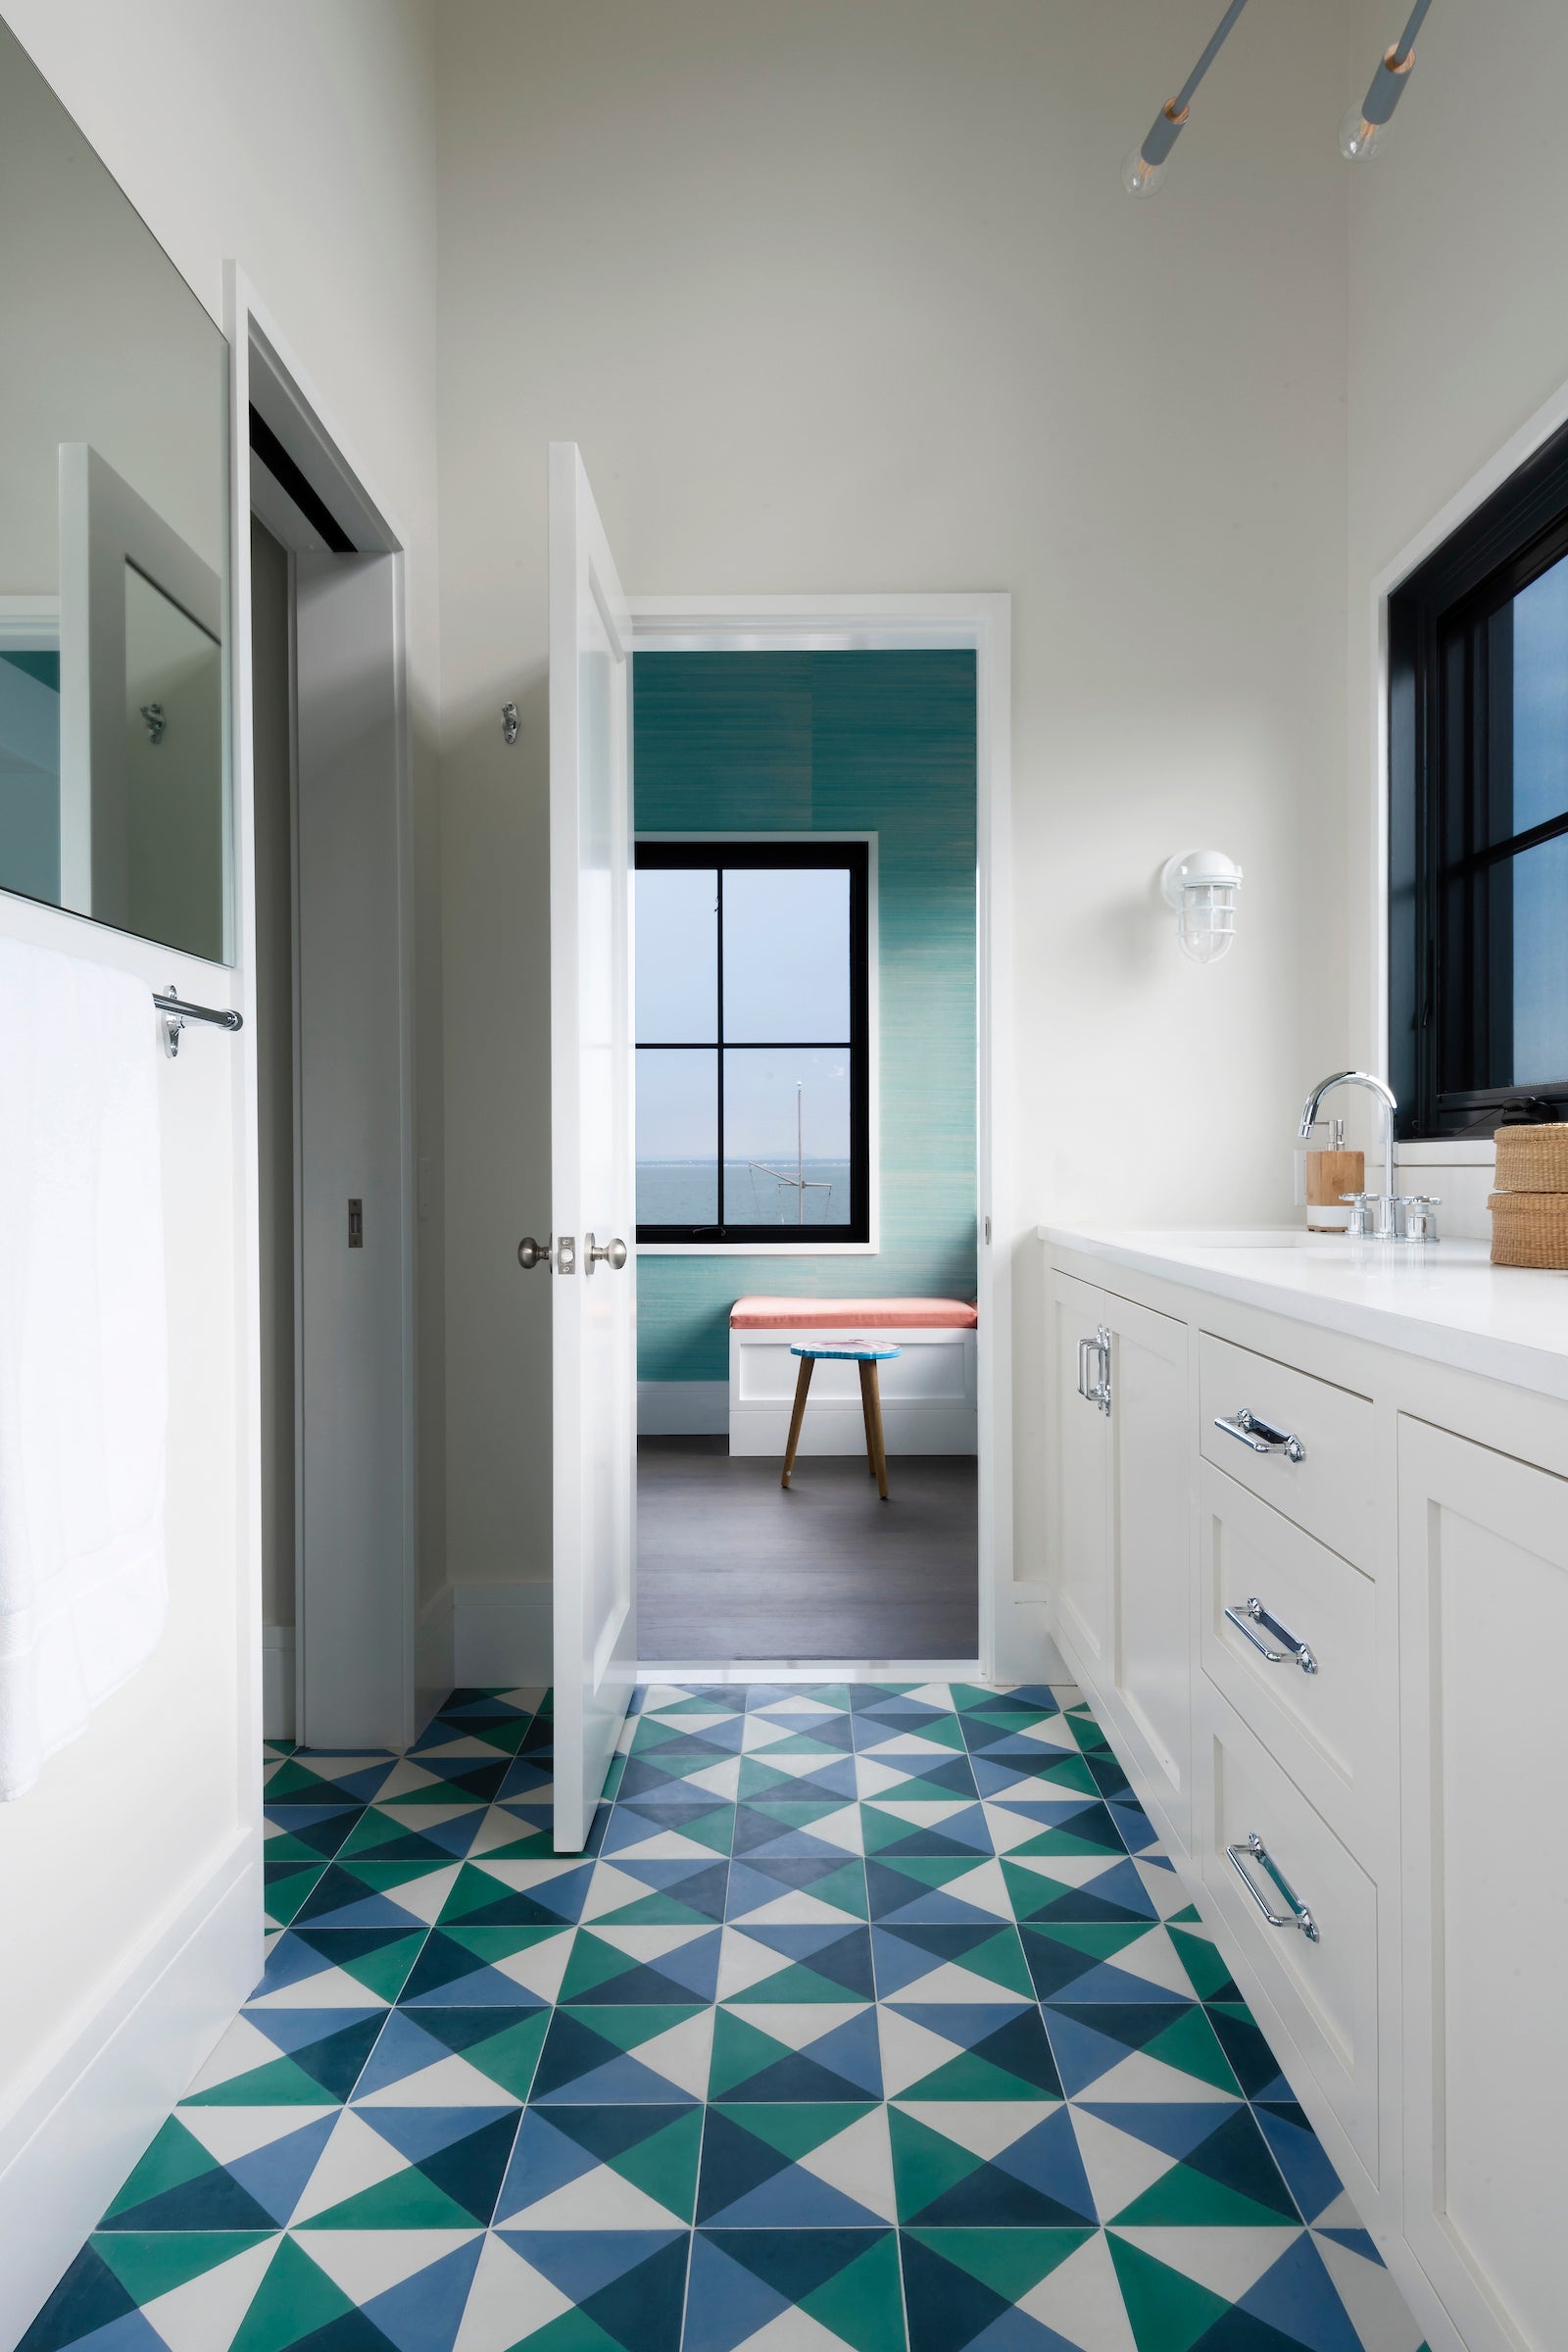 A modern apartment with a bright blue, green and white geometric cement tile floor.